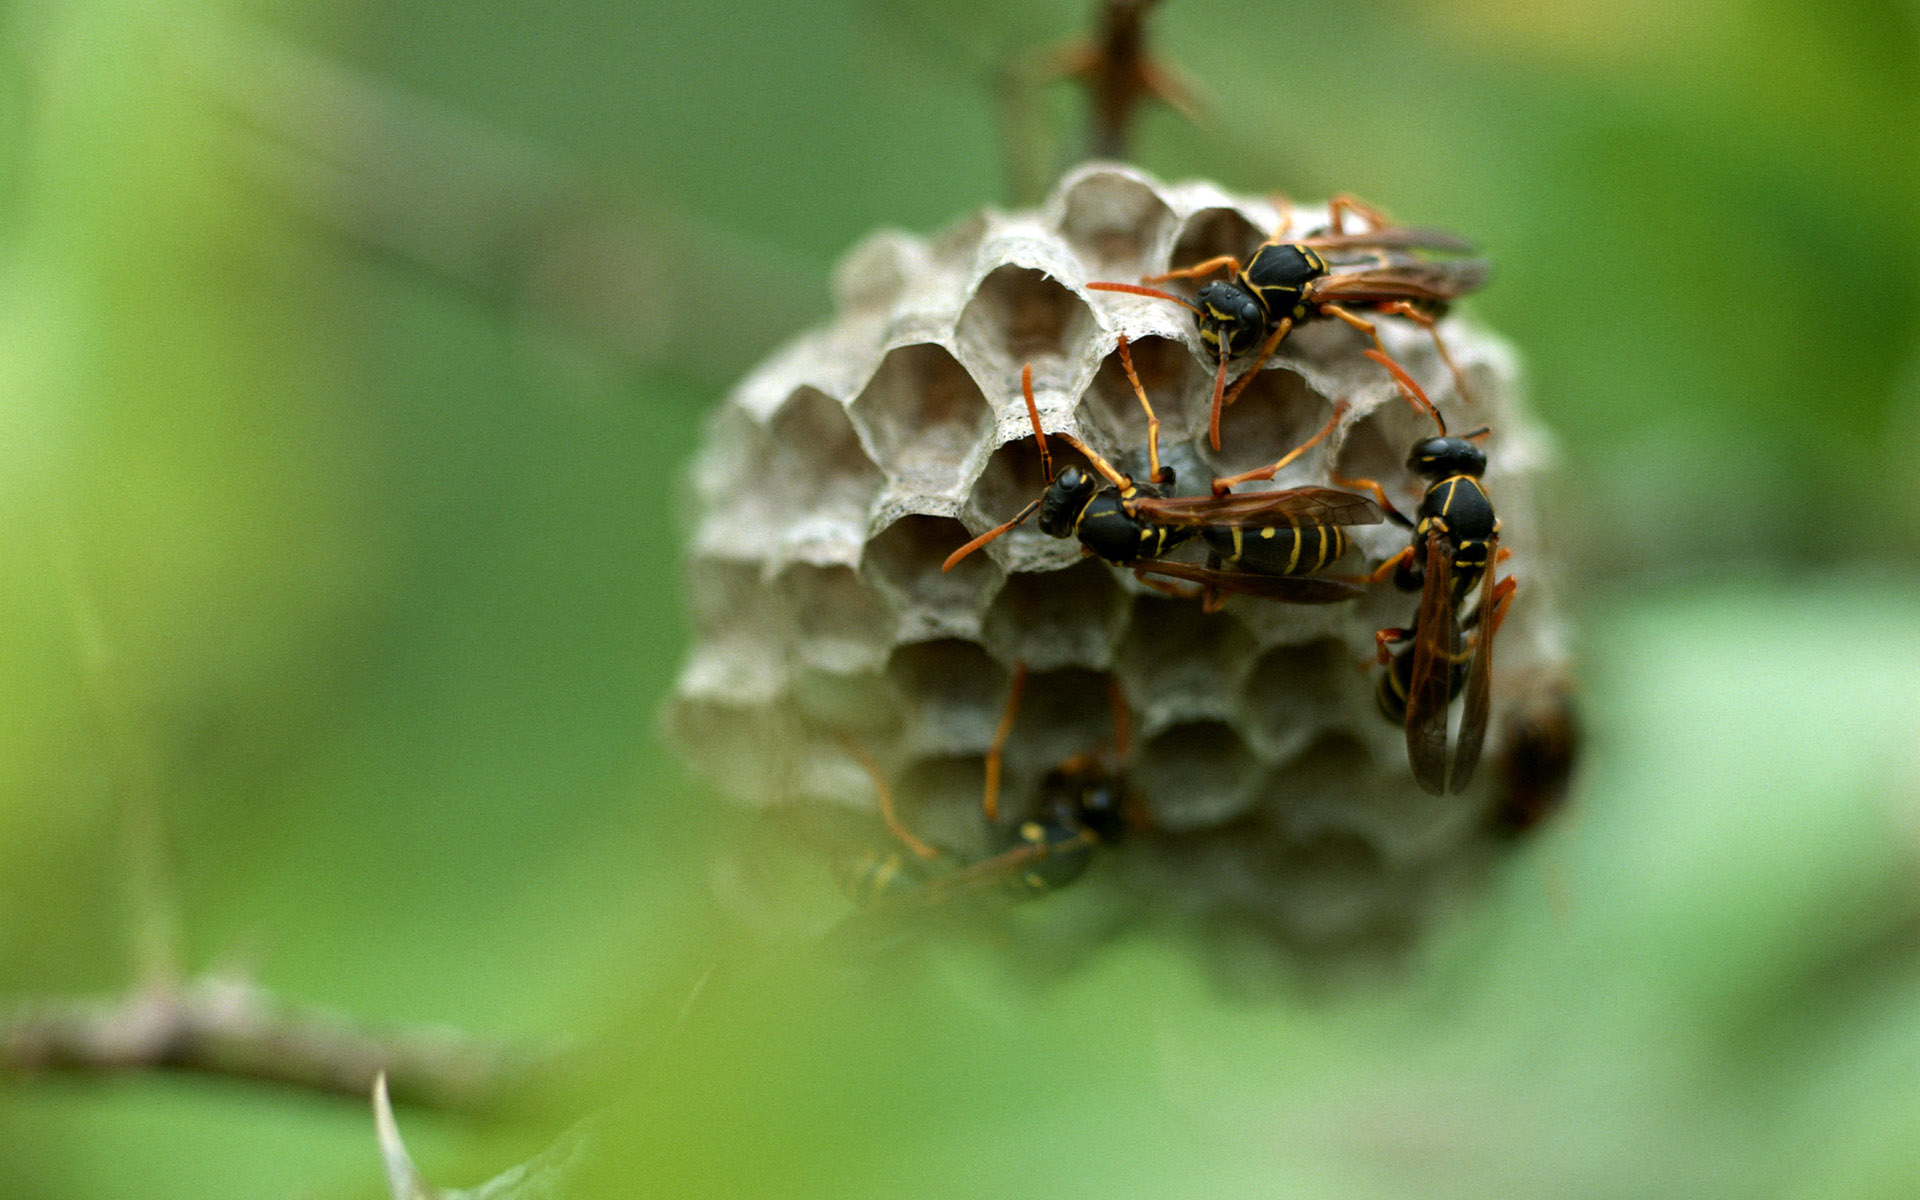 nature, animals, insects, wasp - desktop wallpaper